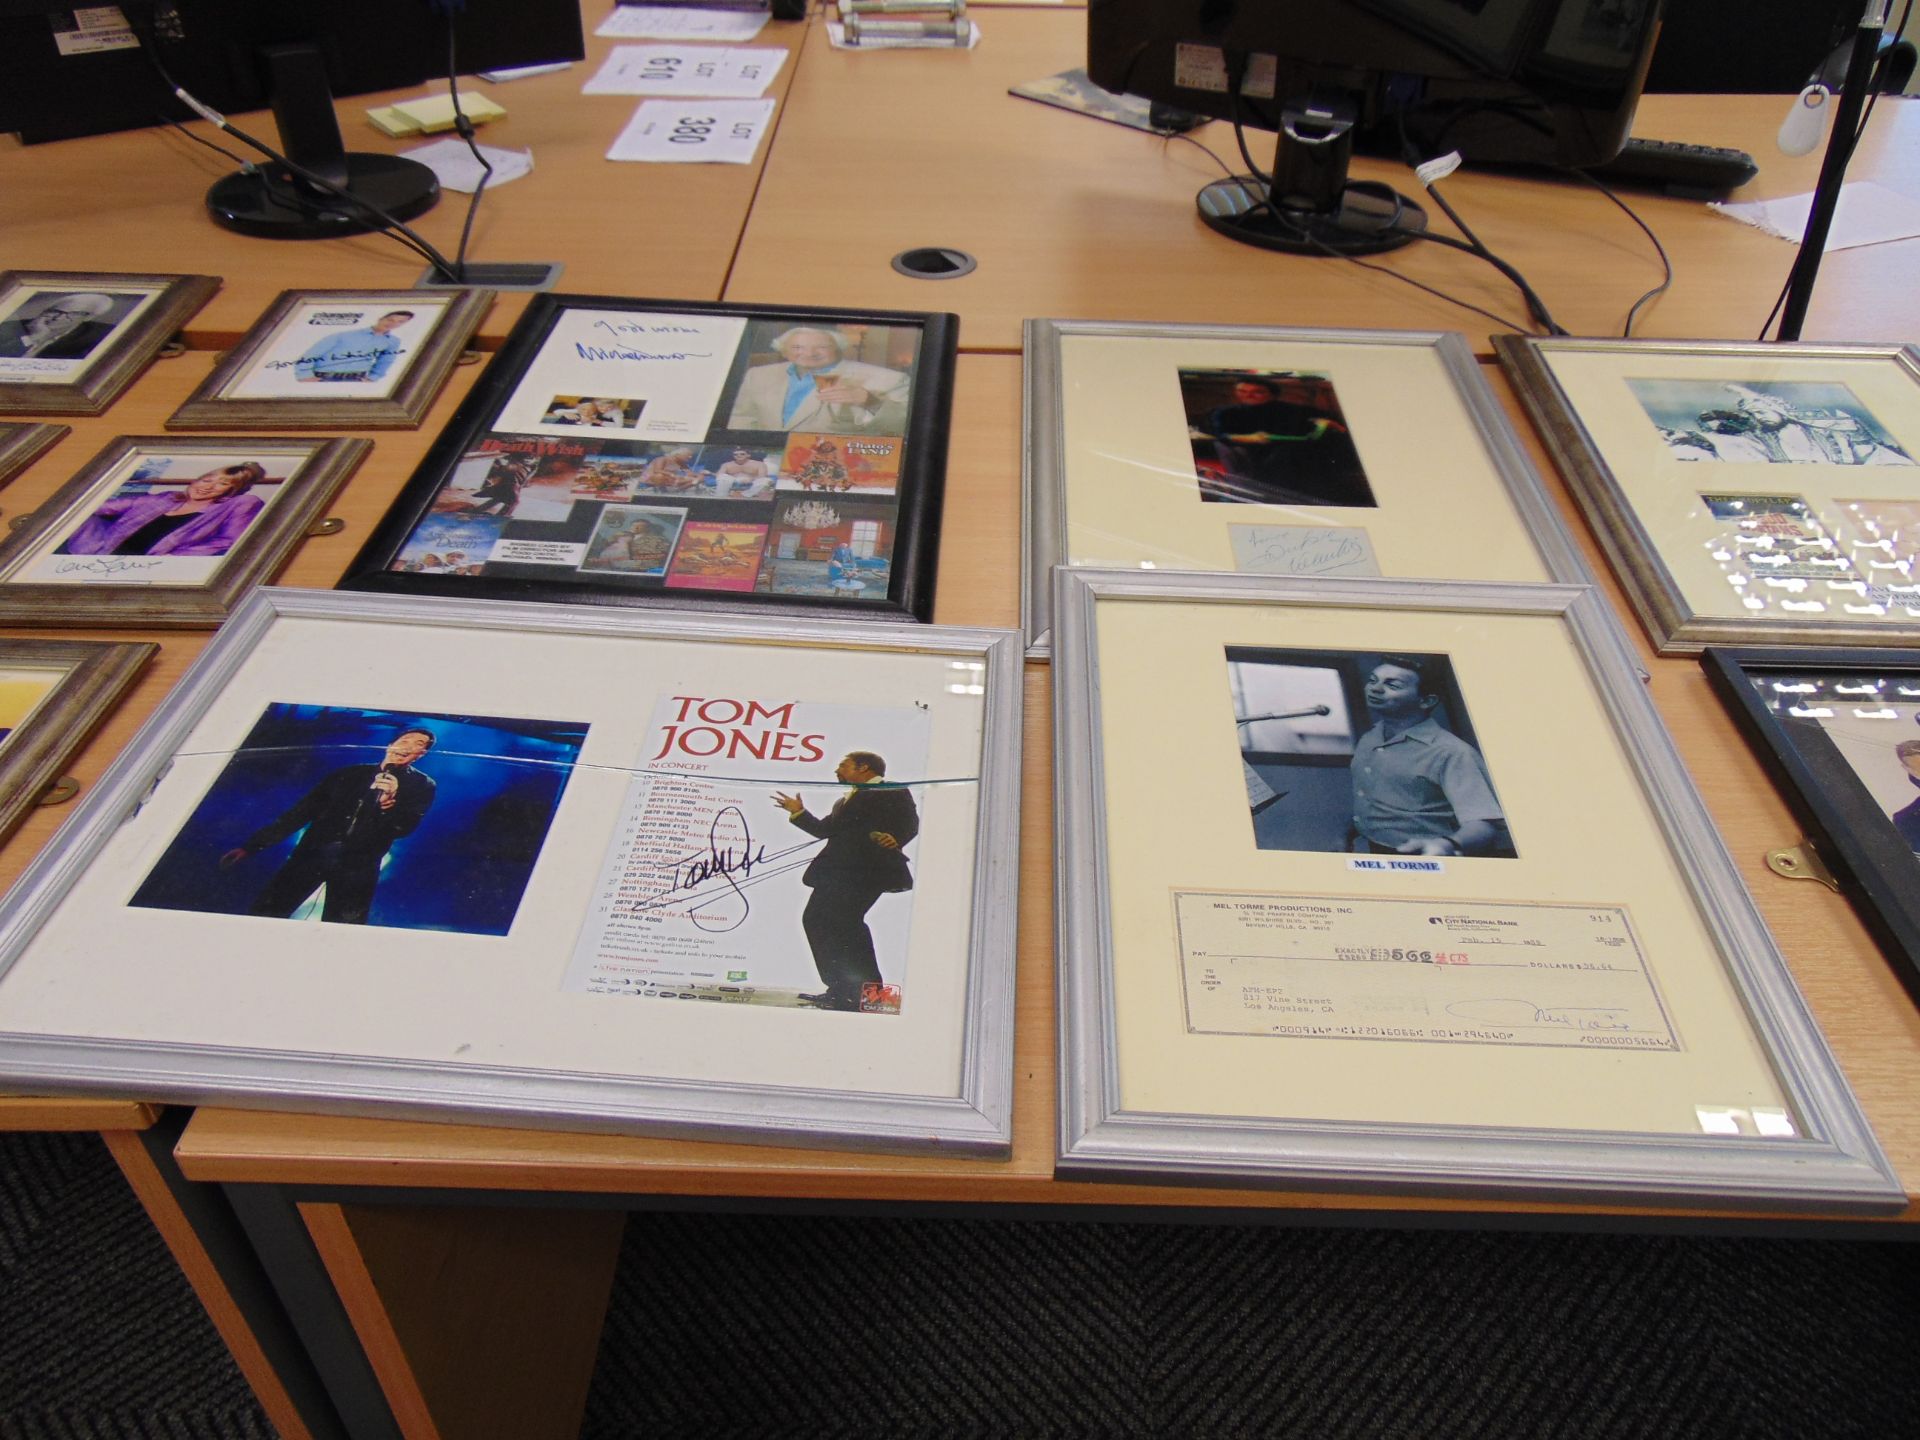 16 x Signed and Framed Pictures inc Tom Jones, Depeche Mode etc etc - Image 4 of 5